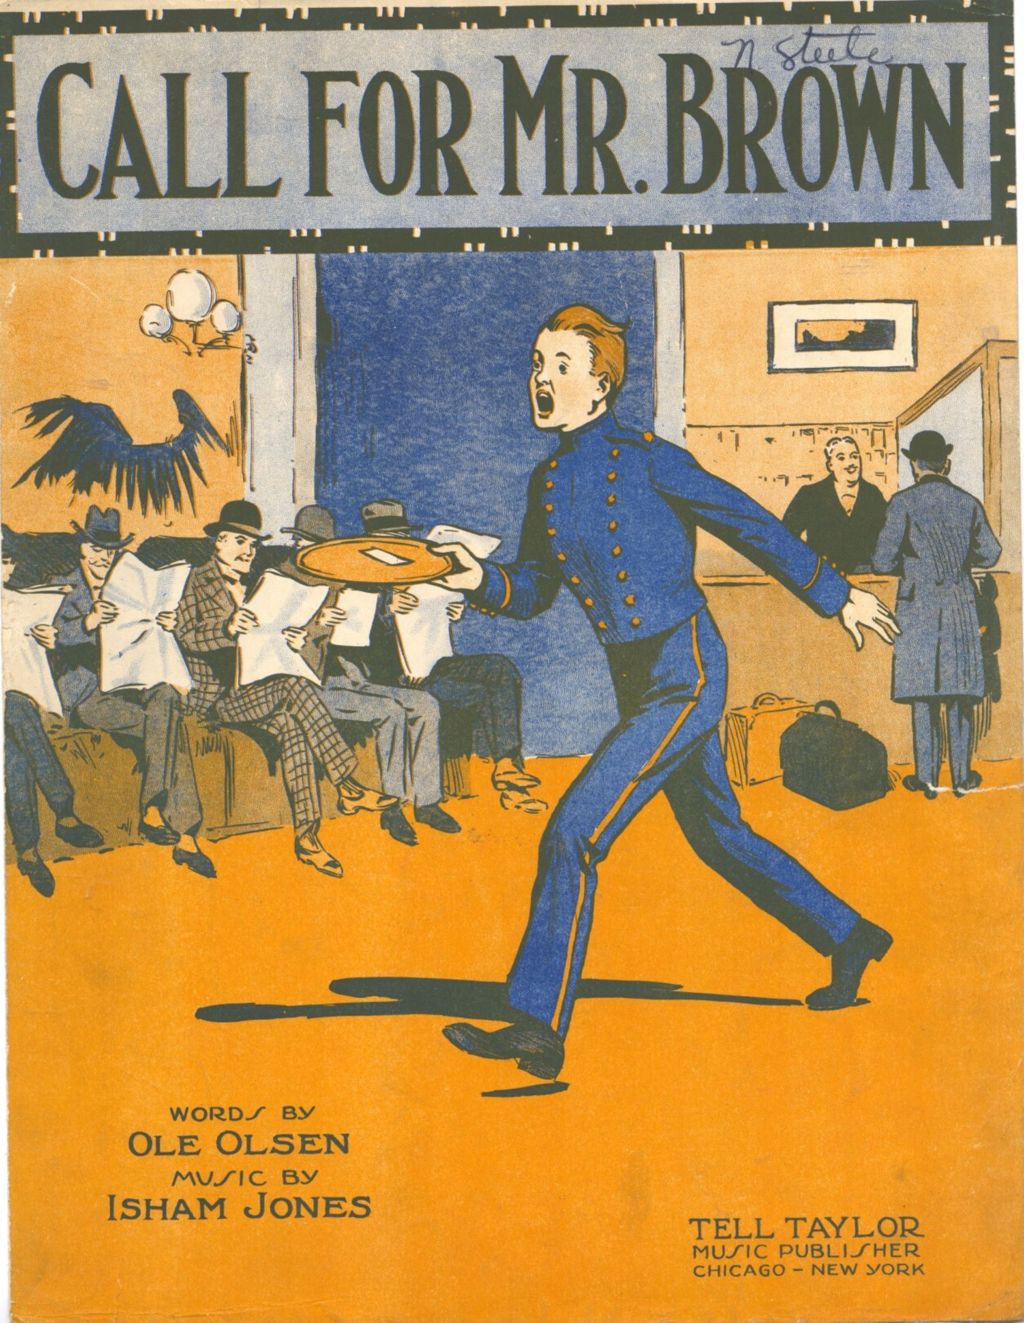 Call For Mr. Brown